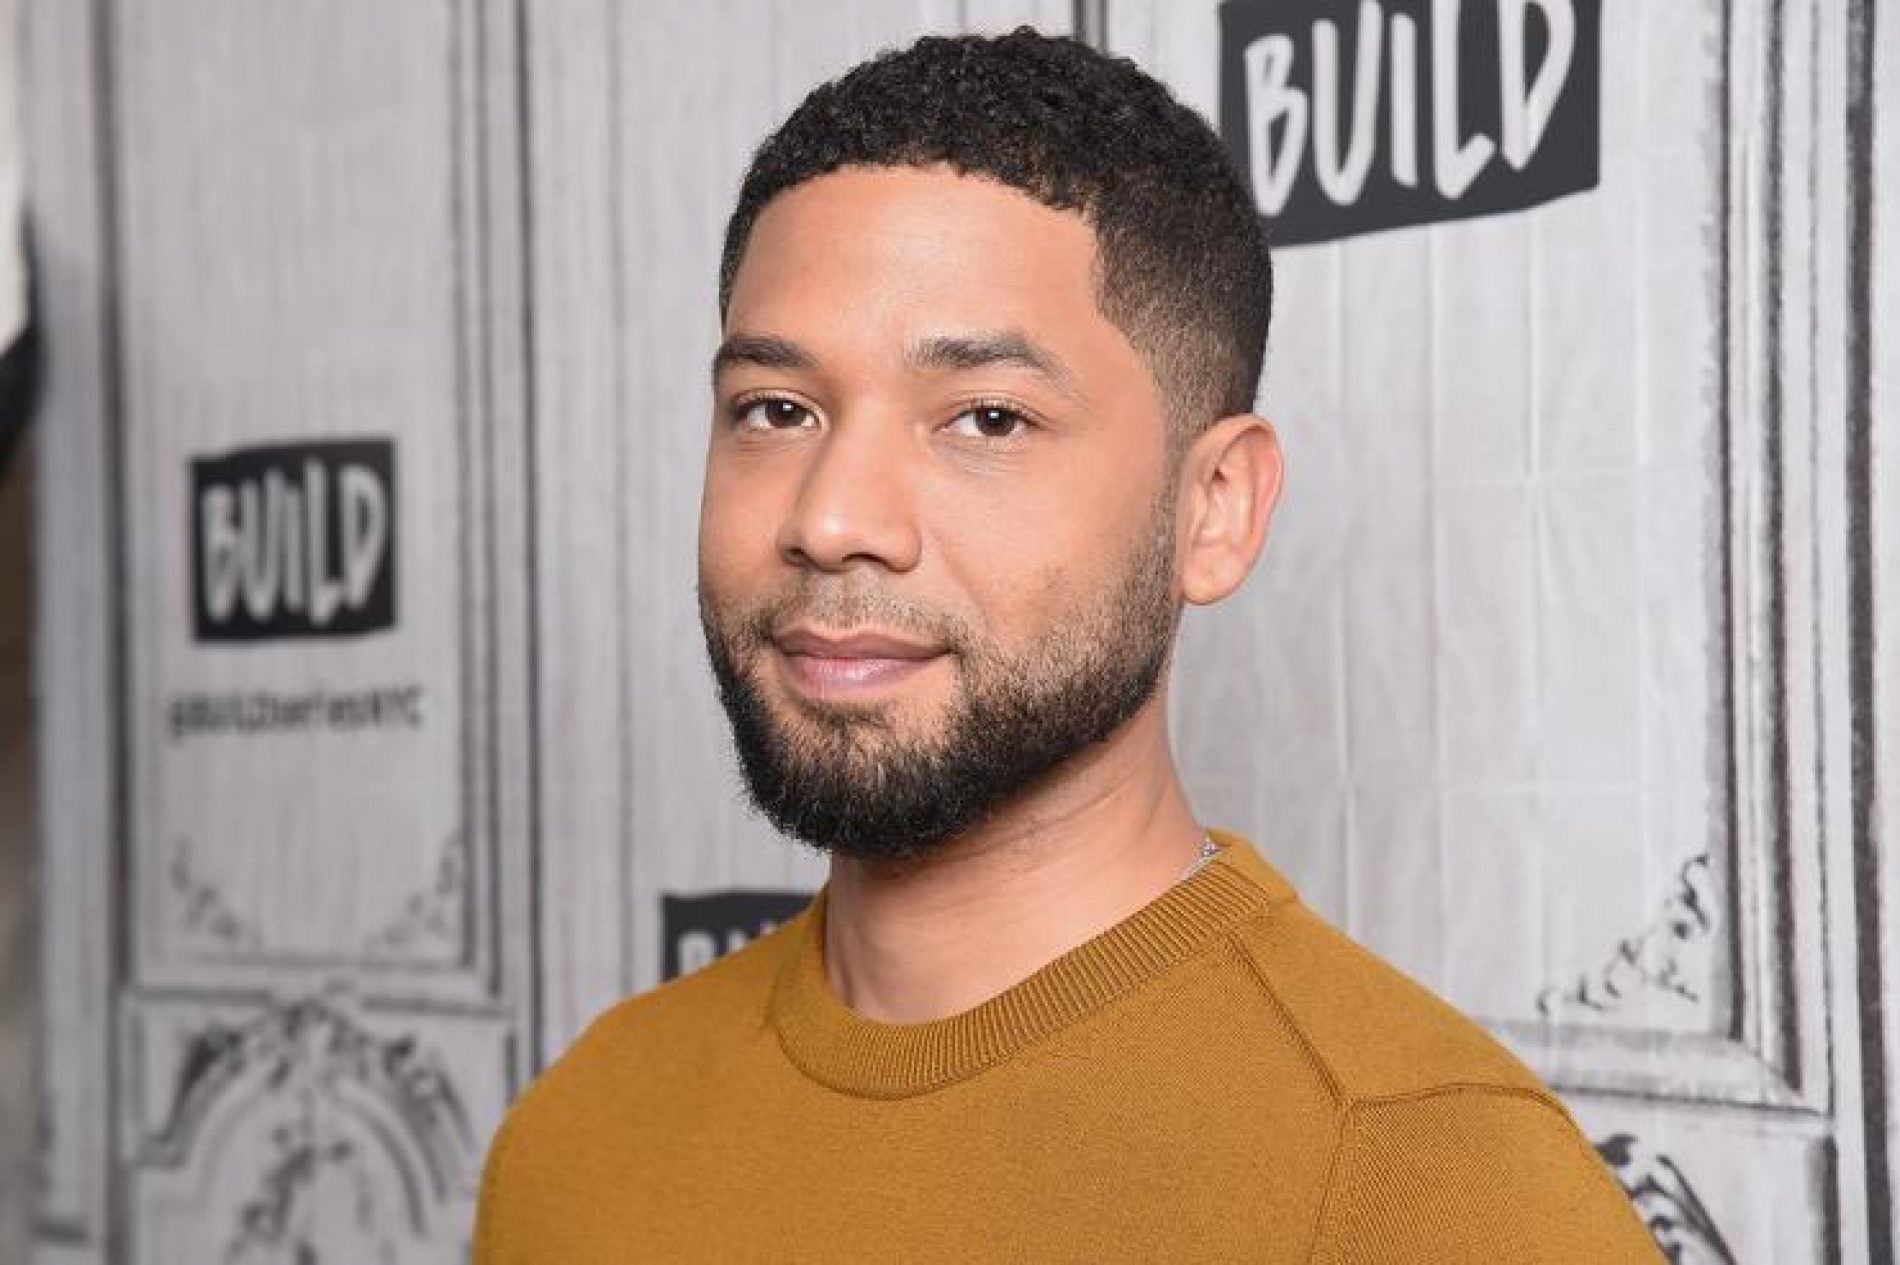 Reactions to Jussie Smollett case shift to confusion and outrage